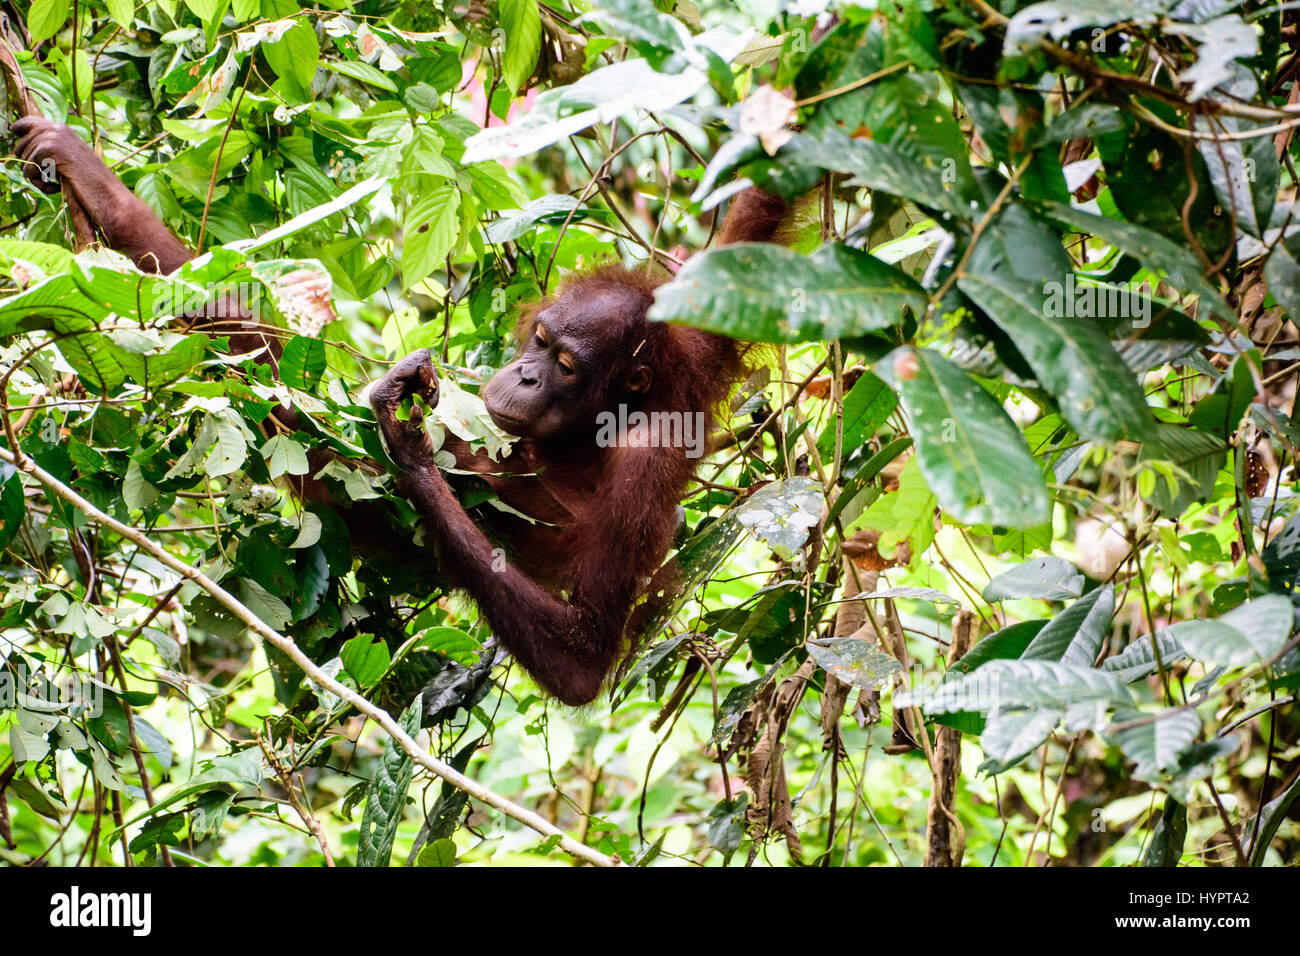 Orangutan searching for food in the trees Stock Photo